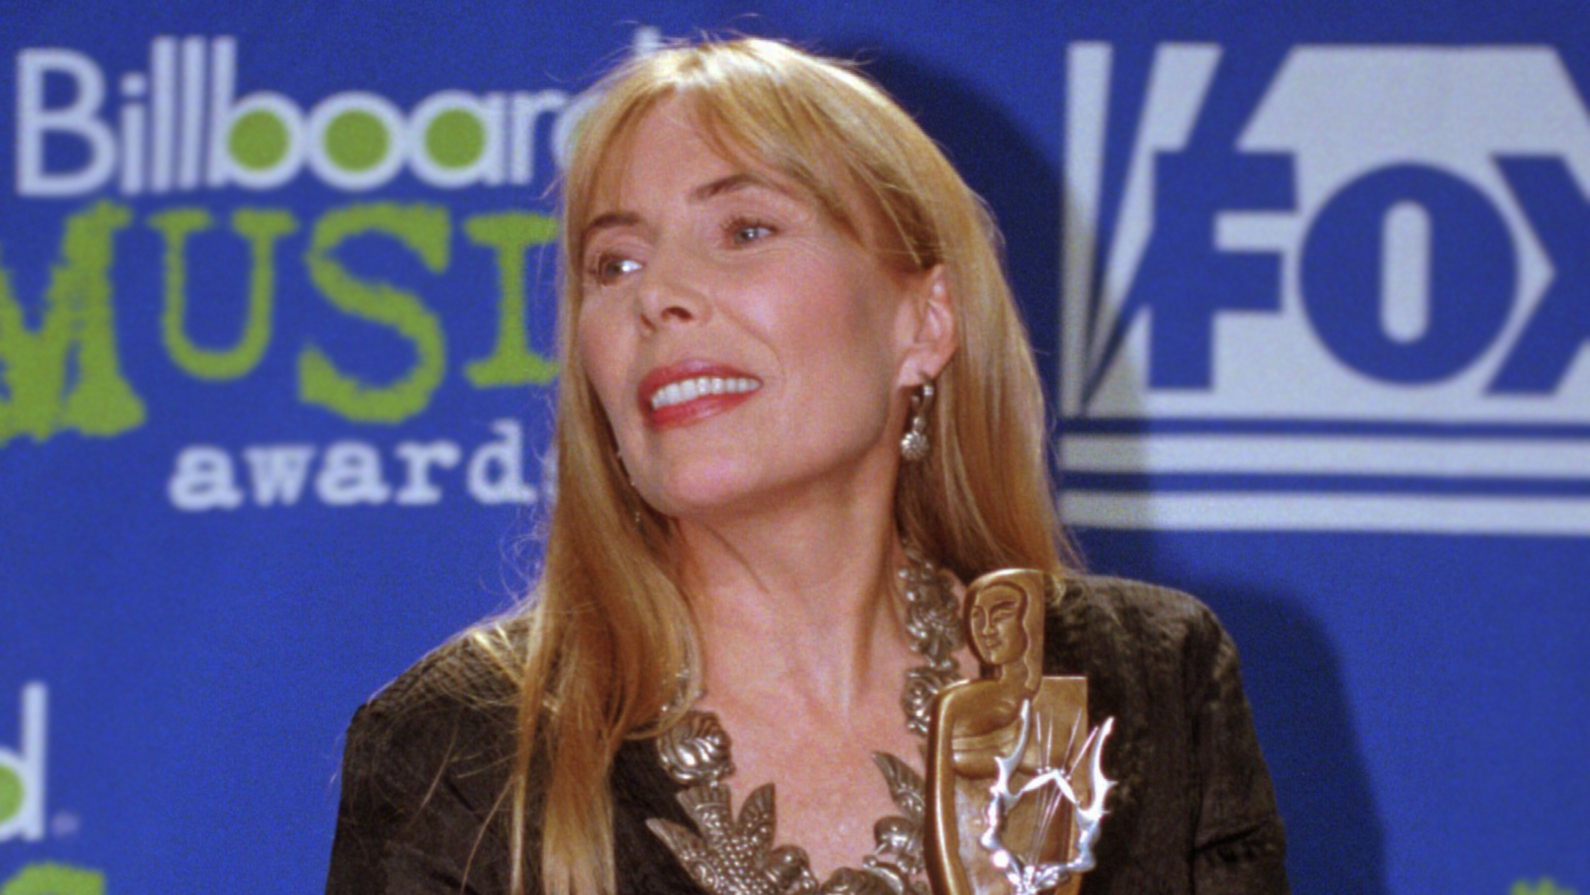 Joni Mitchell poses with the Century Award at the 1995 Billboard Music Awards in New York (AP Photo/Adam Nadel, File)